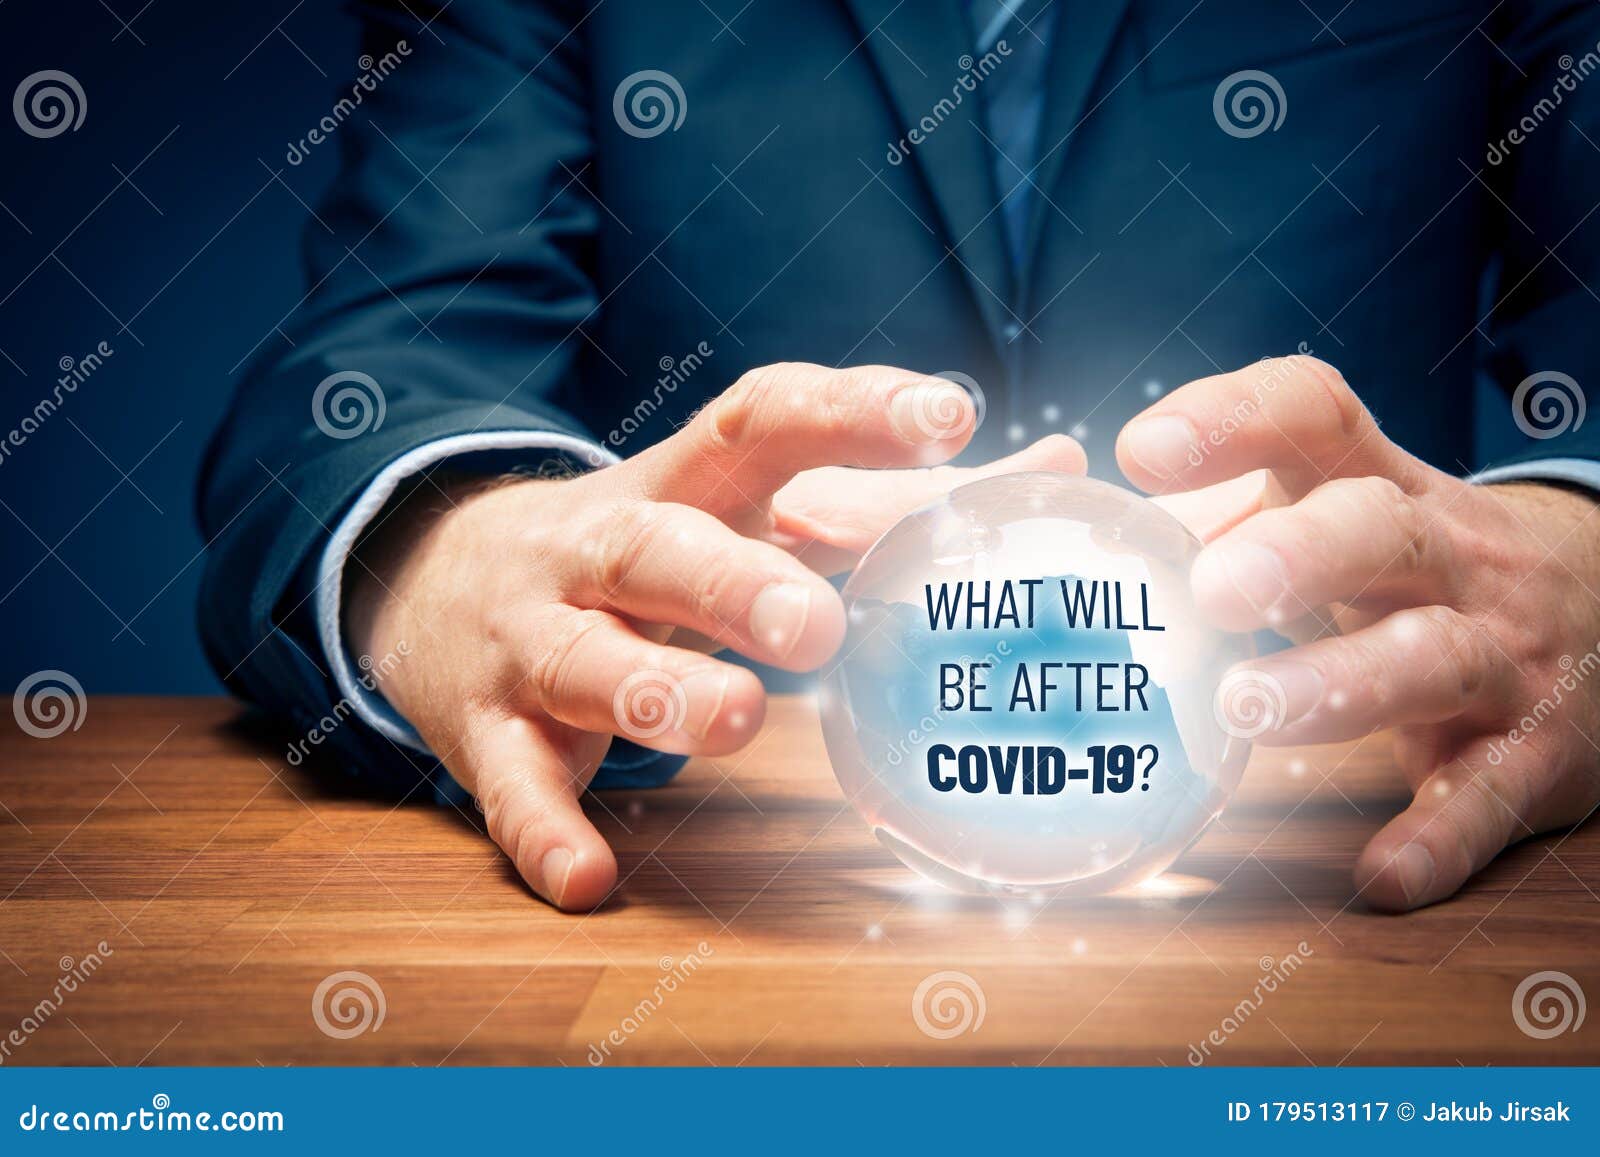 investor predict what will be after covid-19